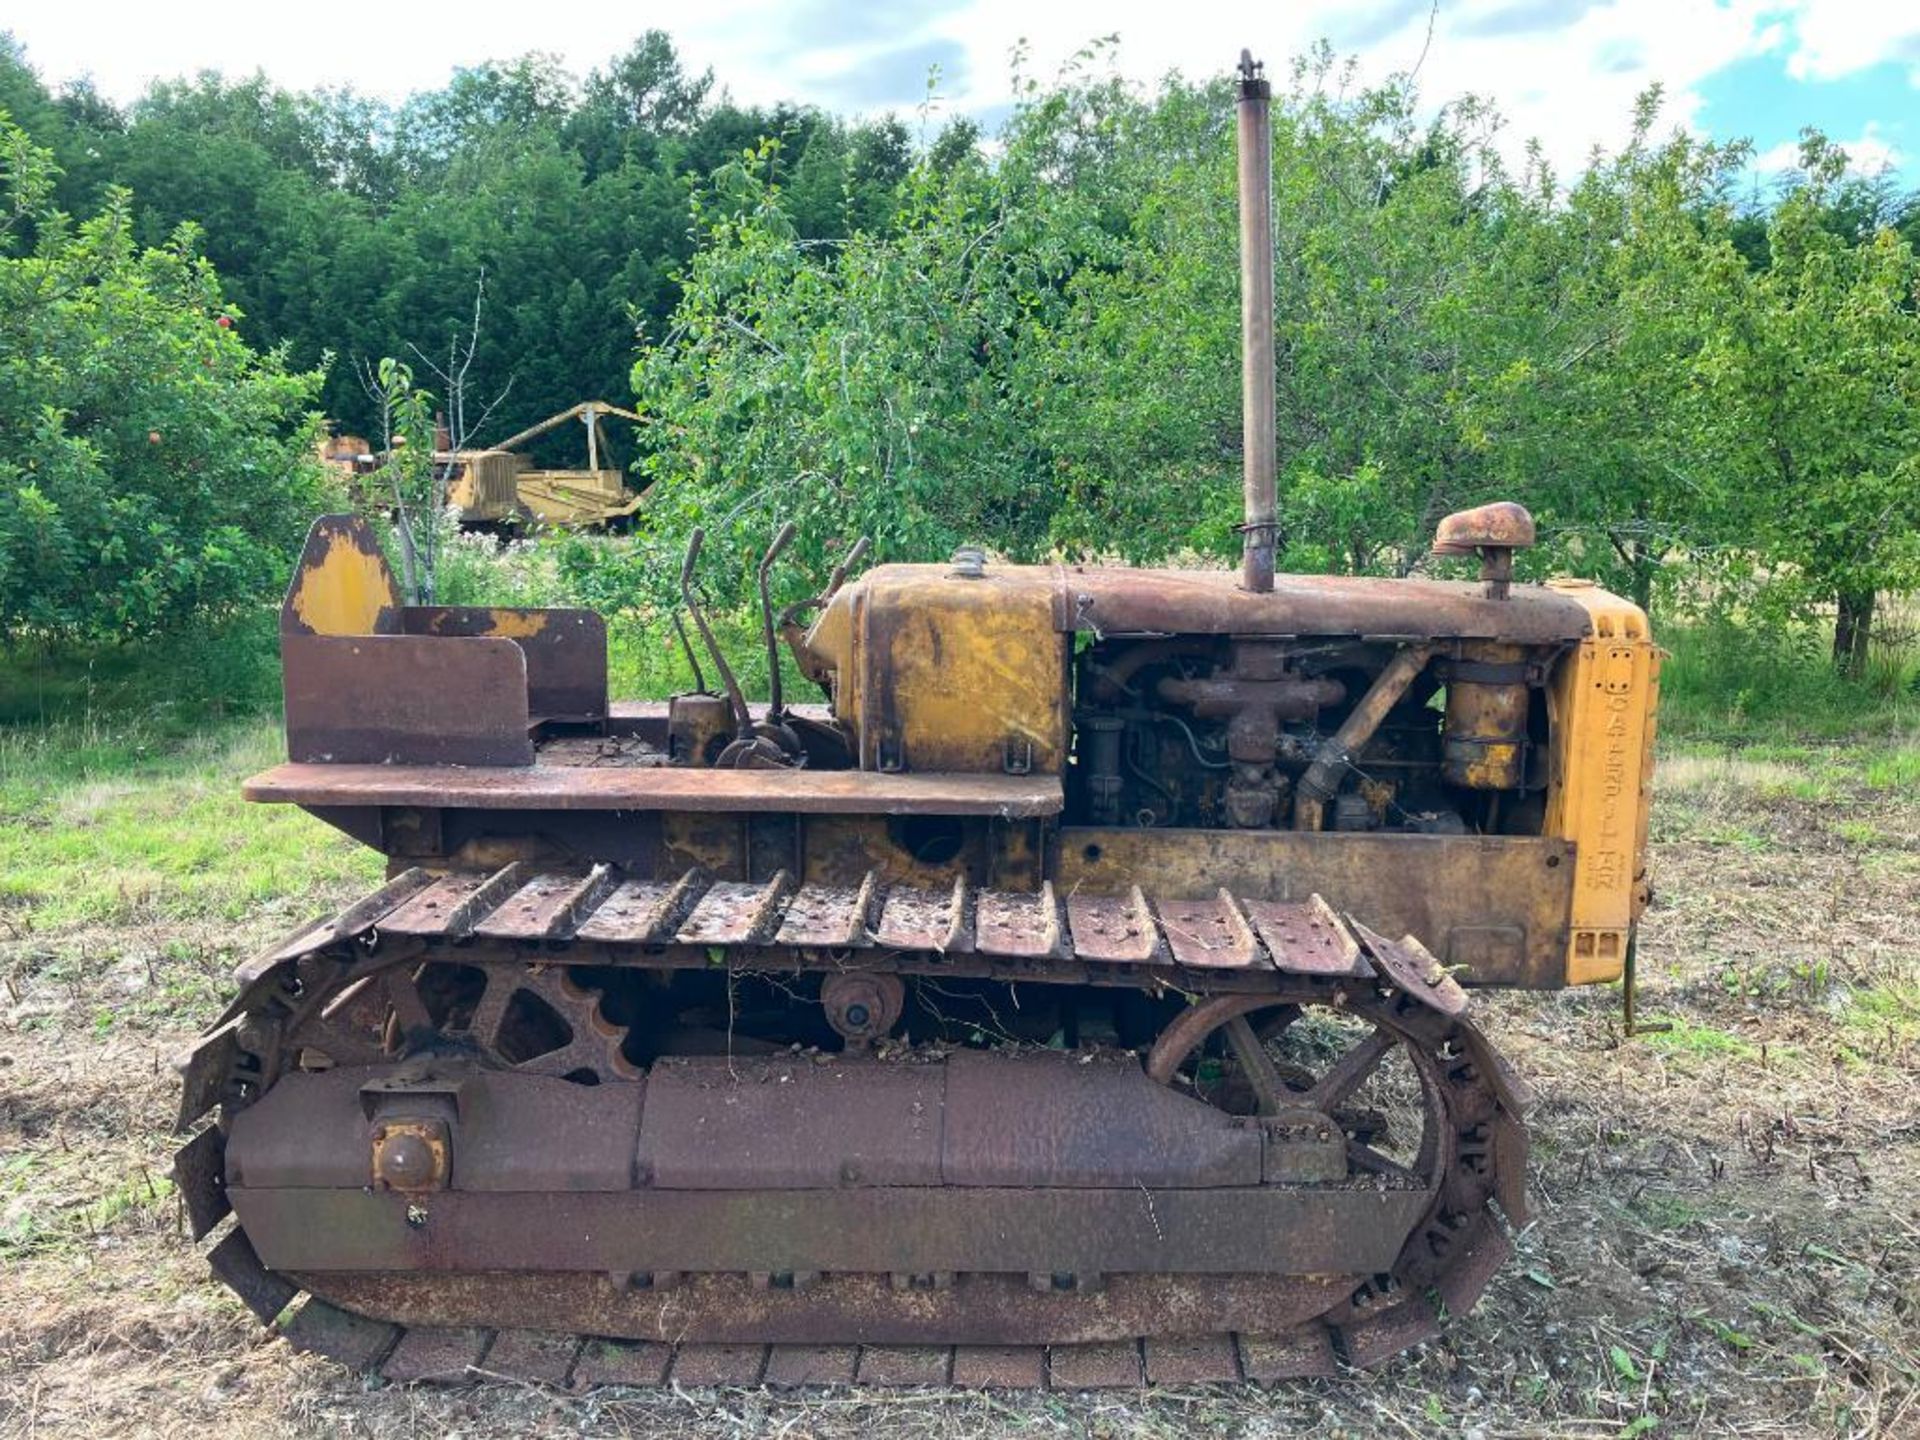 1939 Caterpillar R4 metal tracked crawler with 16" tracks and swinging drawbar. Serial No: 6G1021WS - Image 13 of 14